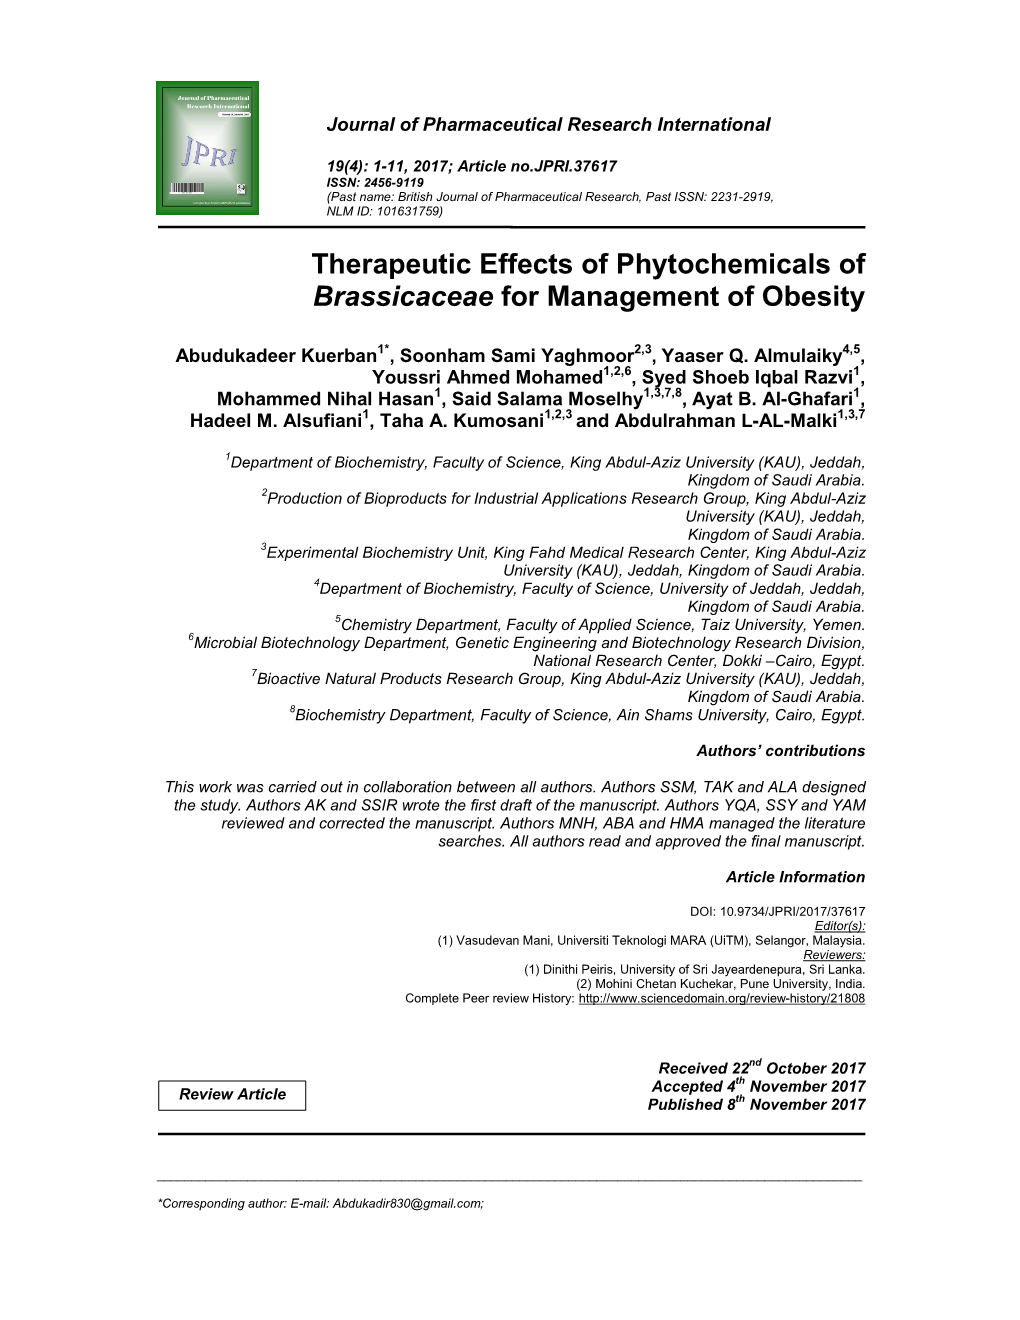 Therapeutic Effects of Phytochemicals of Brassicaceae for Management of Obesity